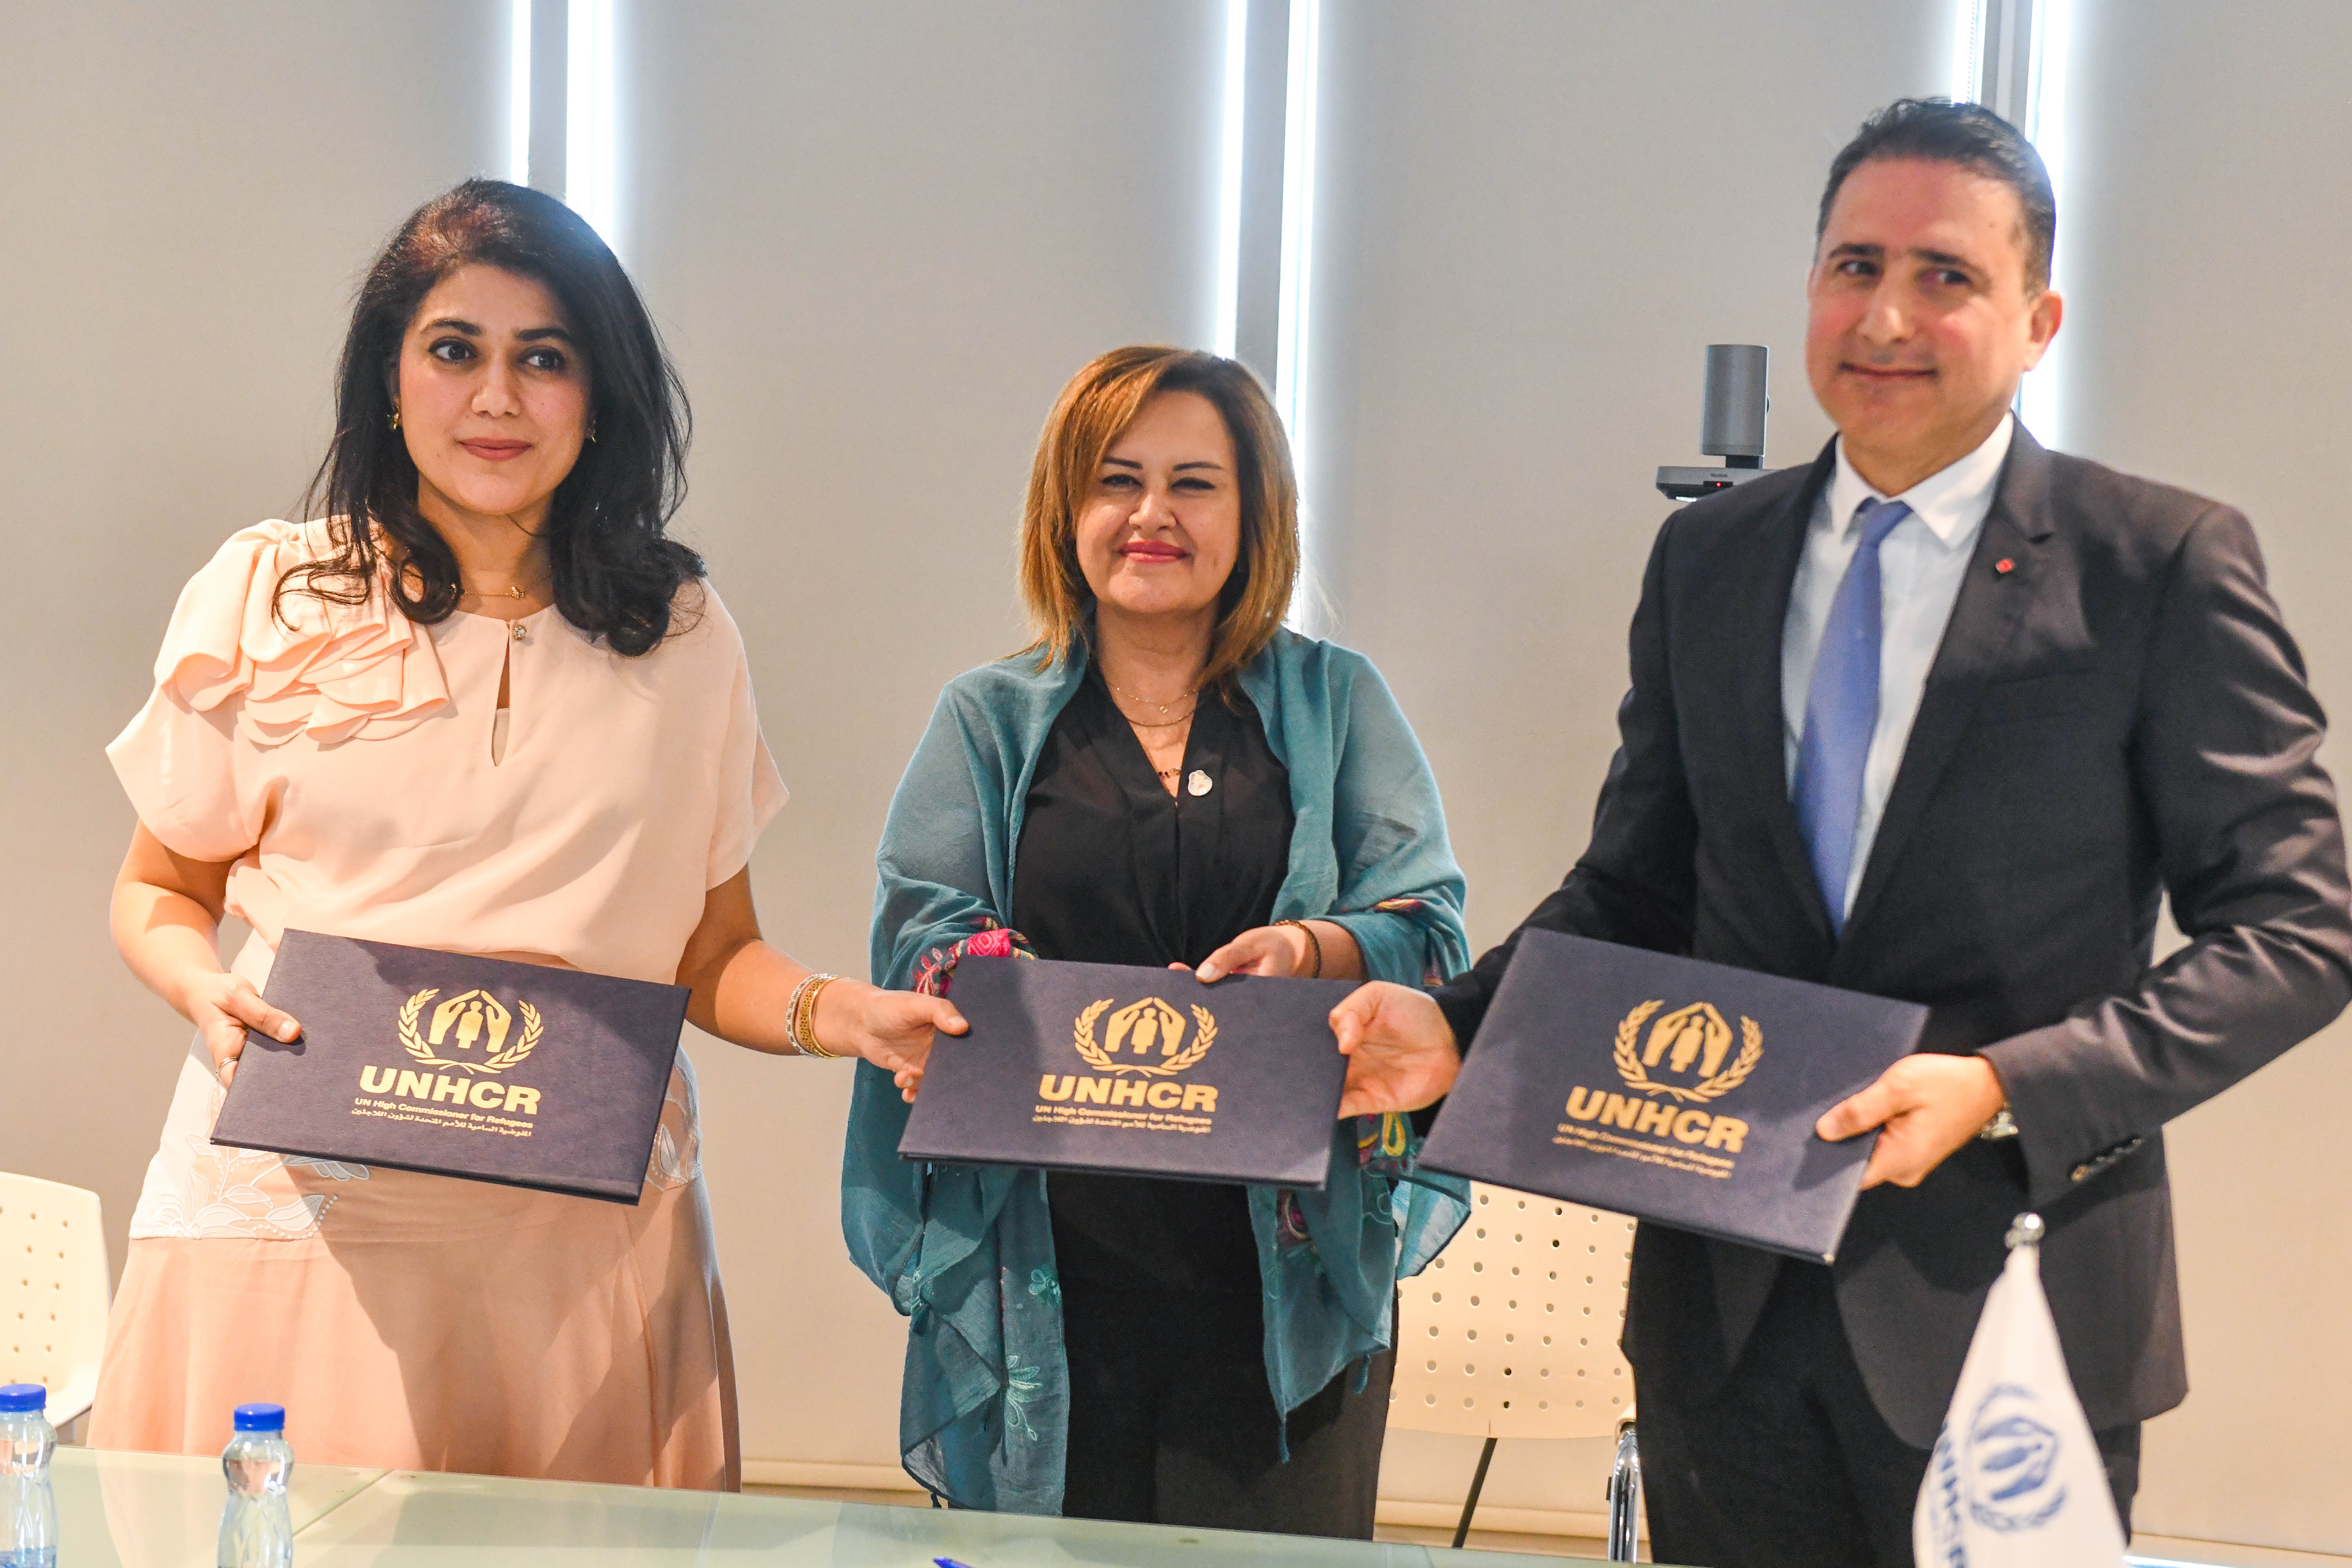 Kuwait University, UNHCR, engineering firm sign LOI on humanitarian projects